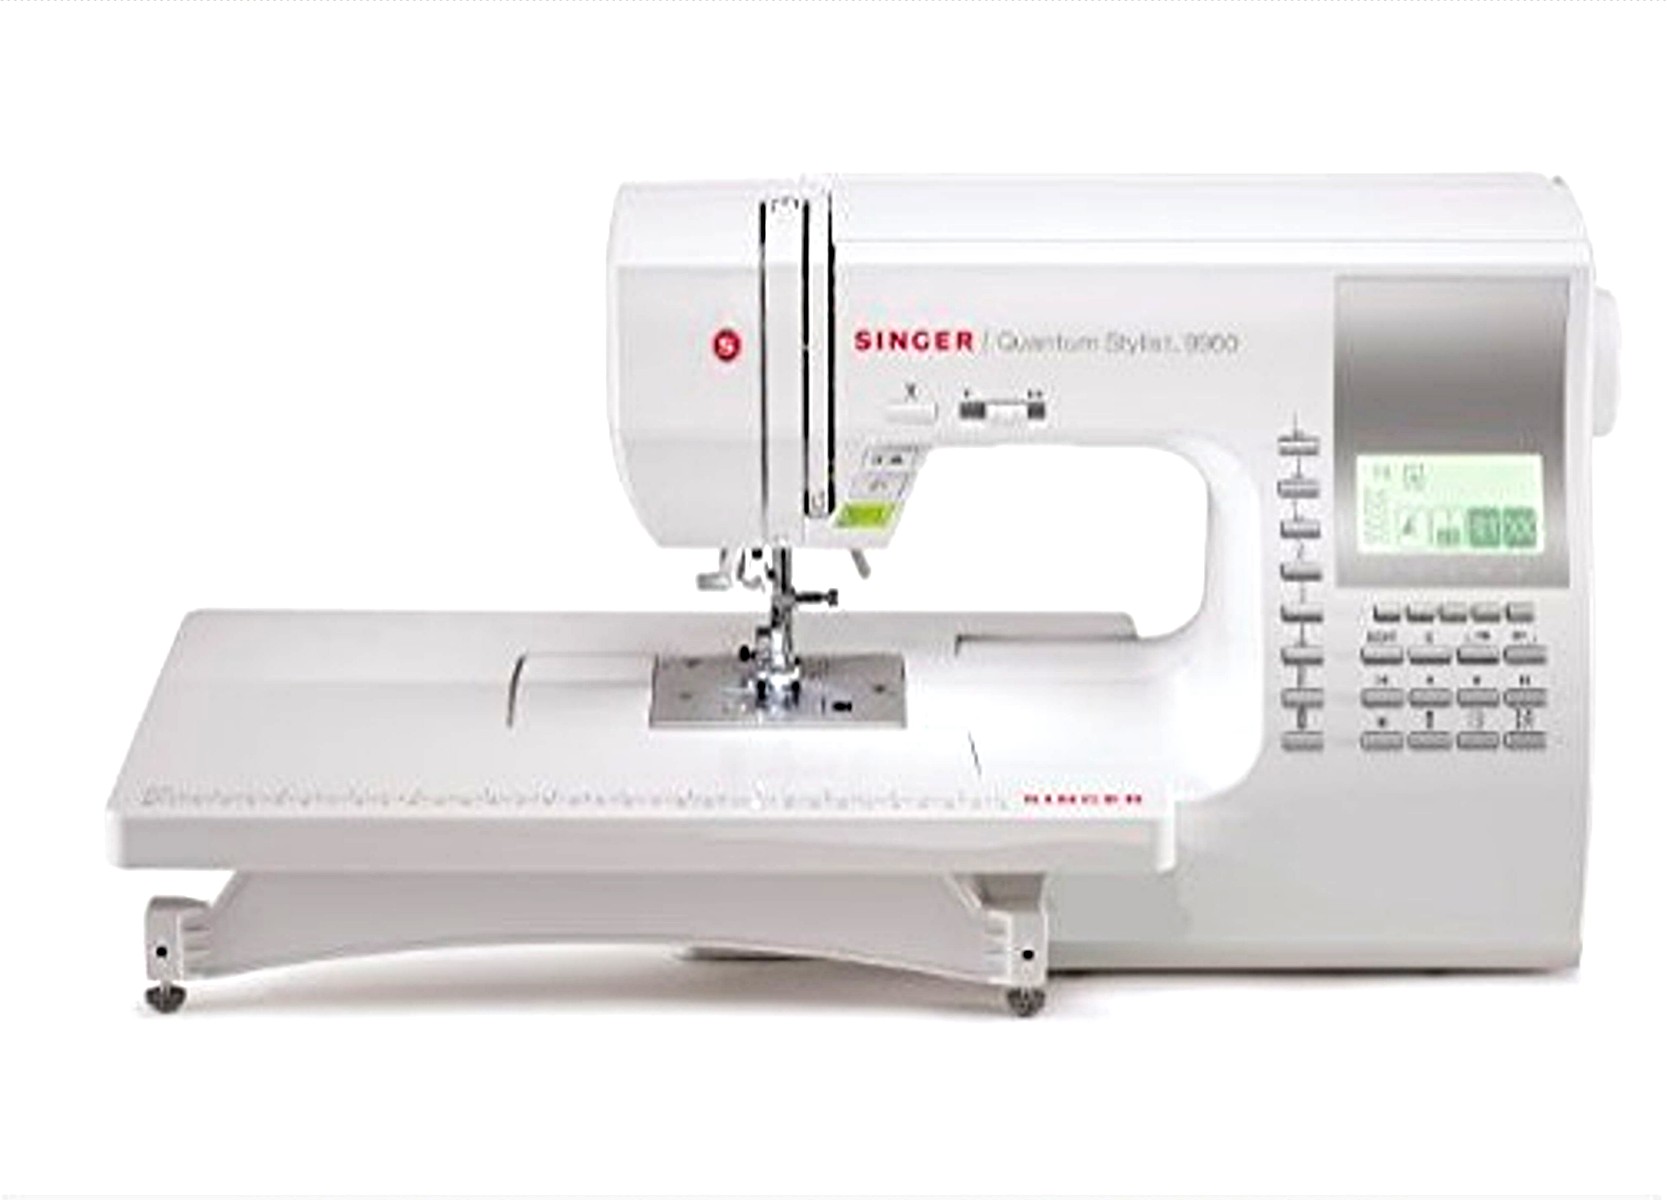 SINGER 9960 Computerised Sewing Machine for sale online